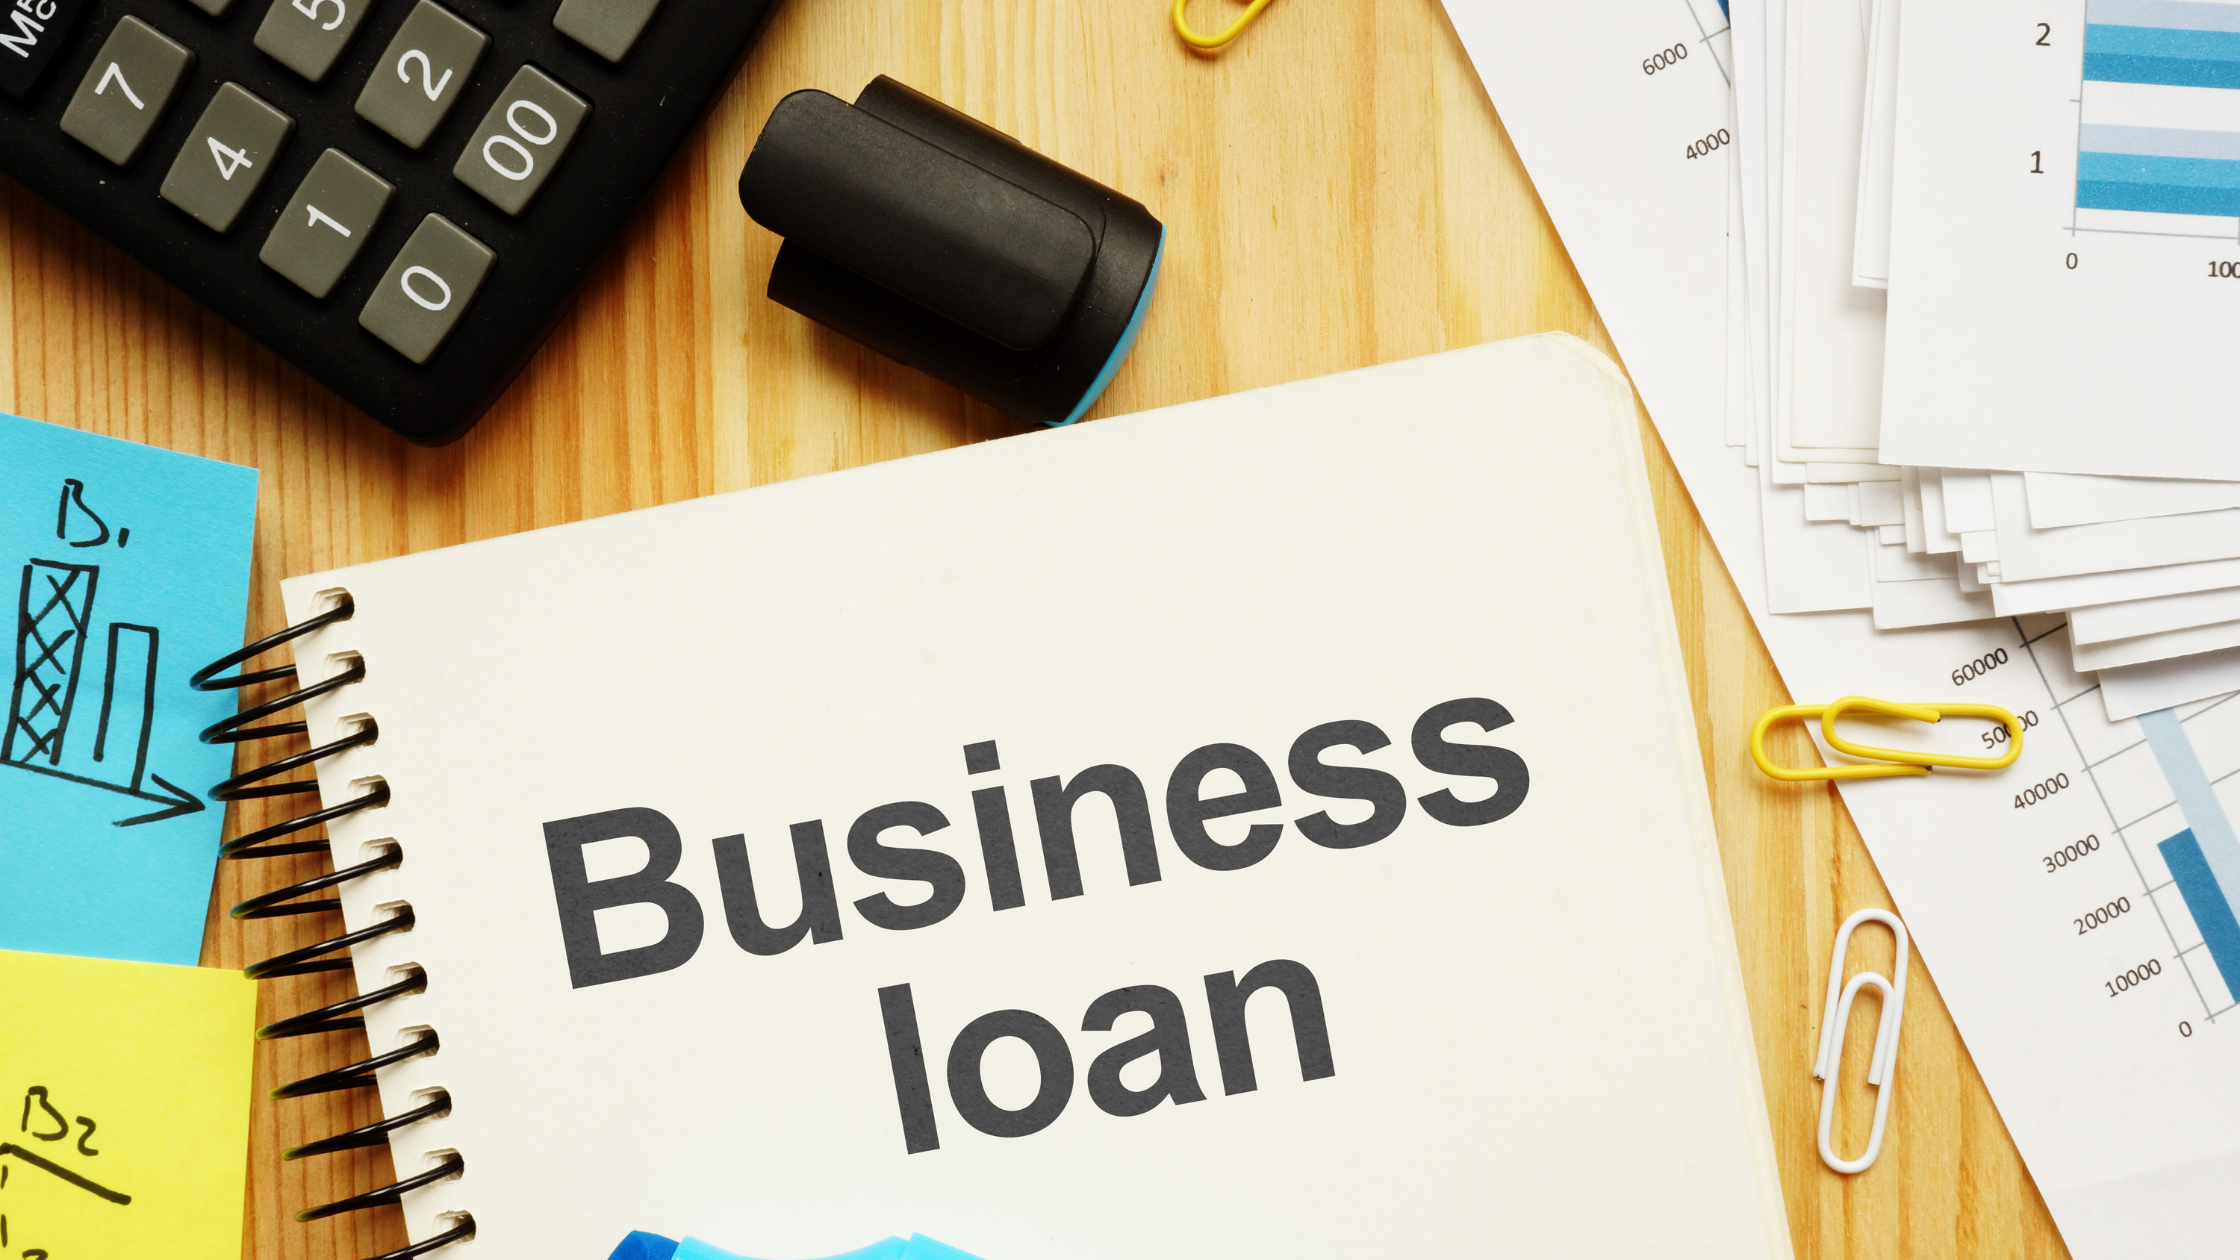 How to get approved for a business loan